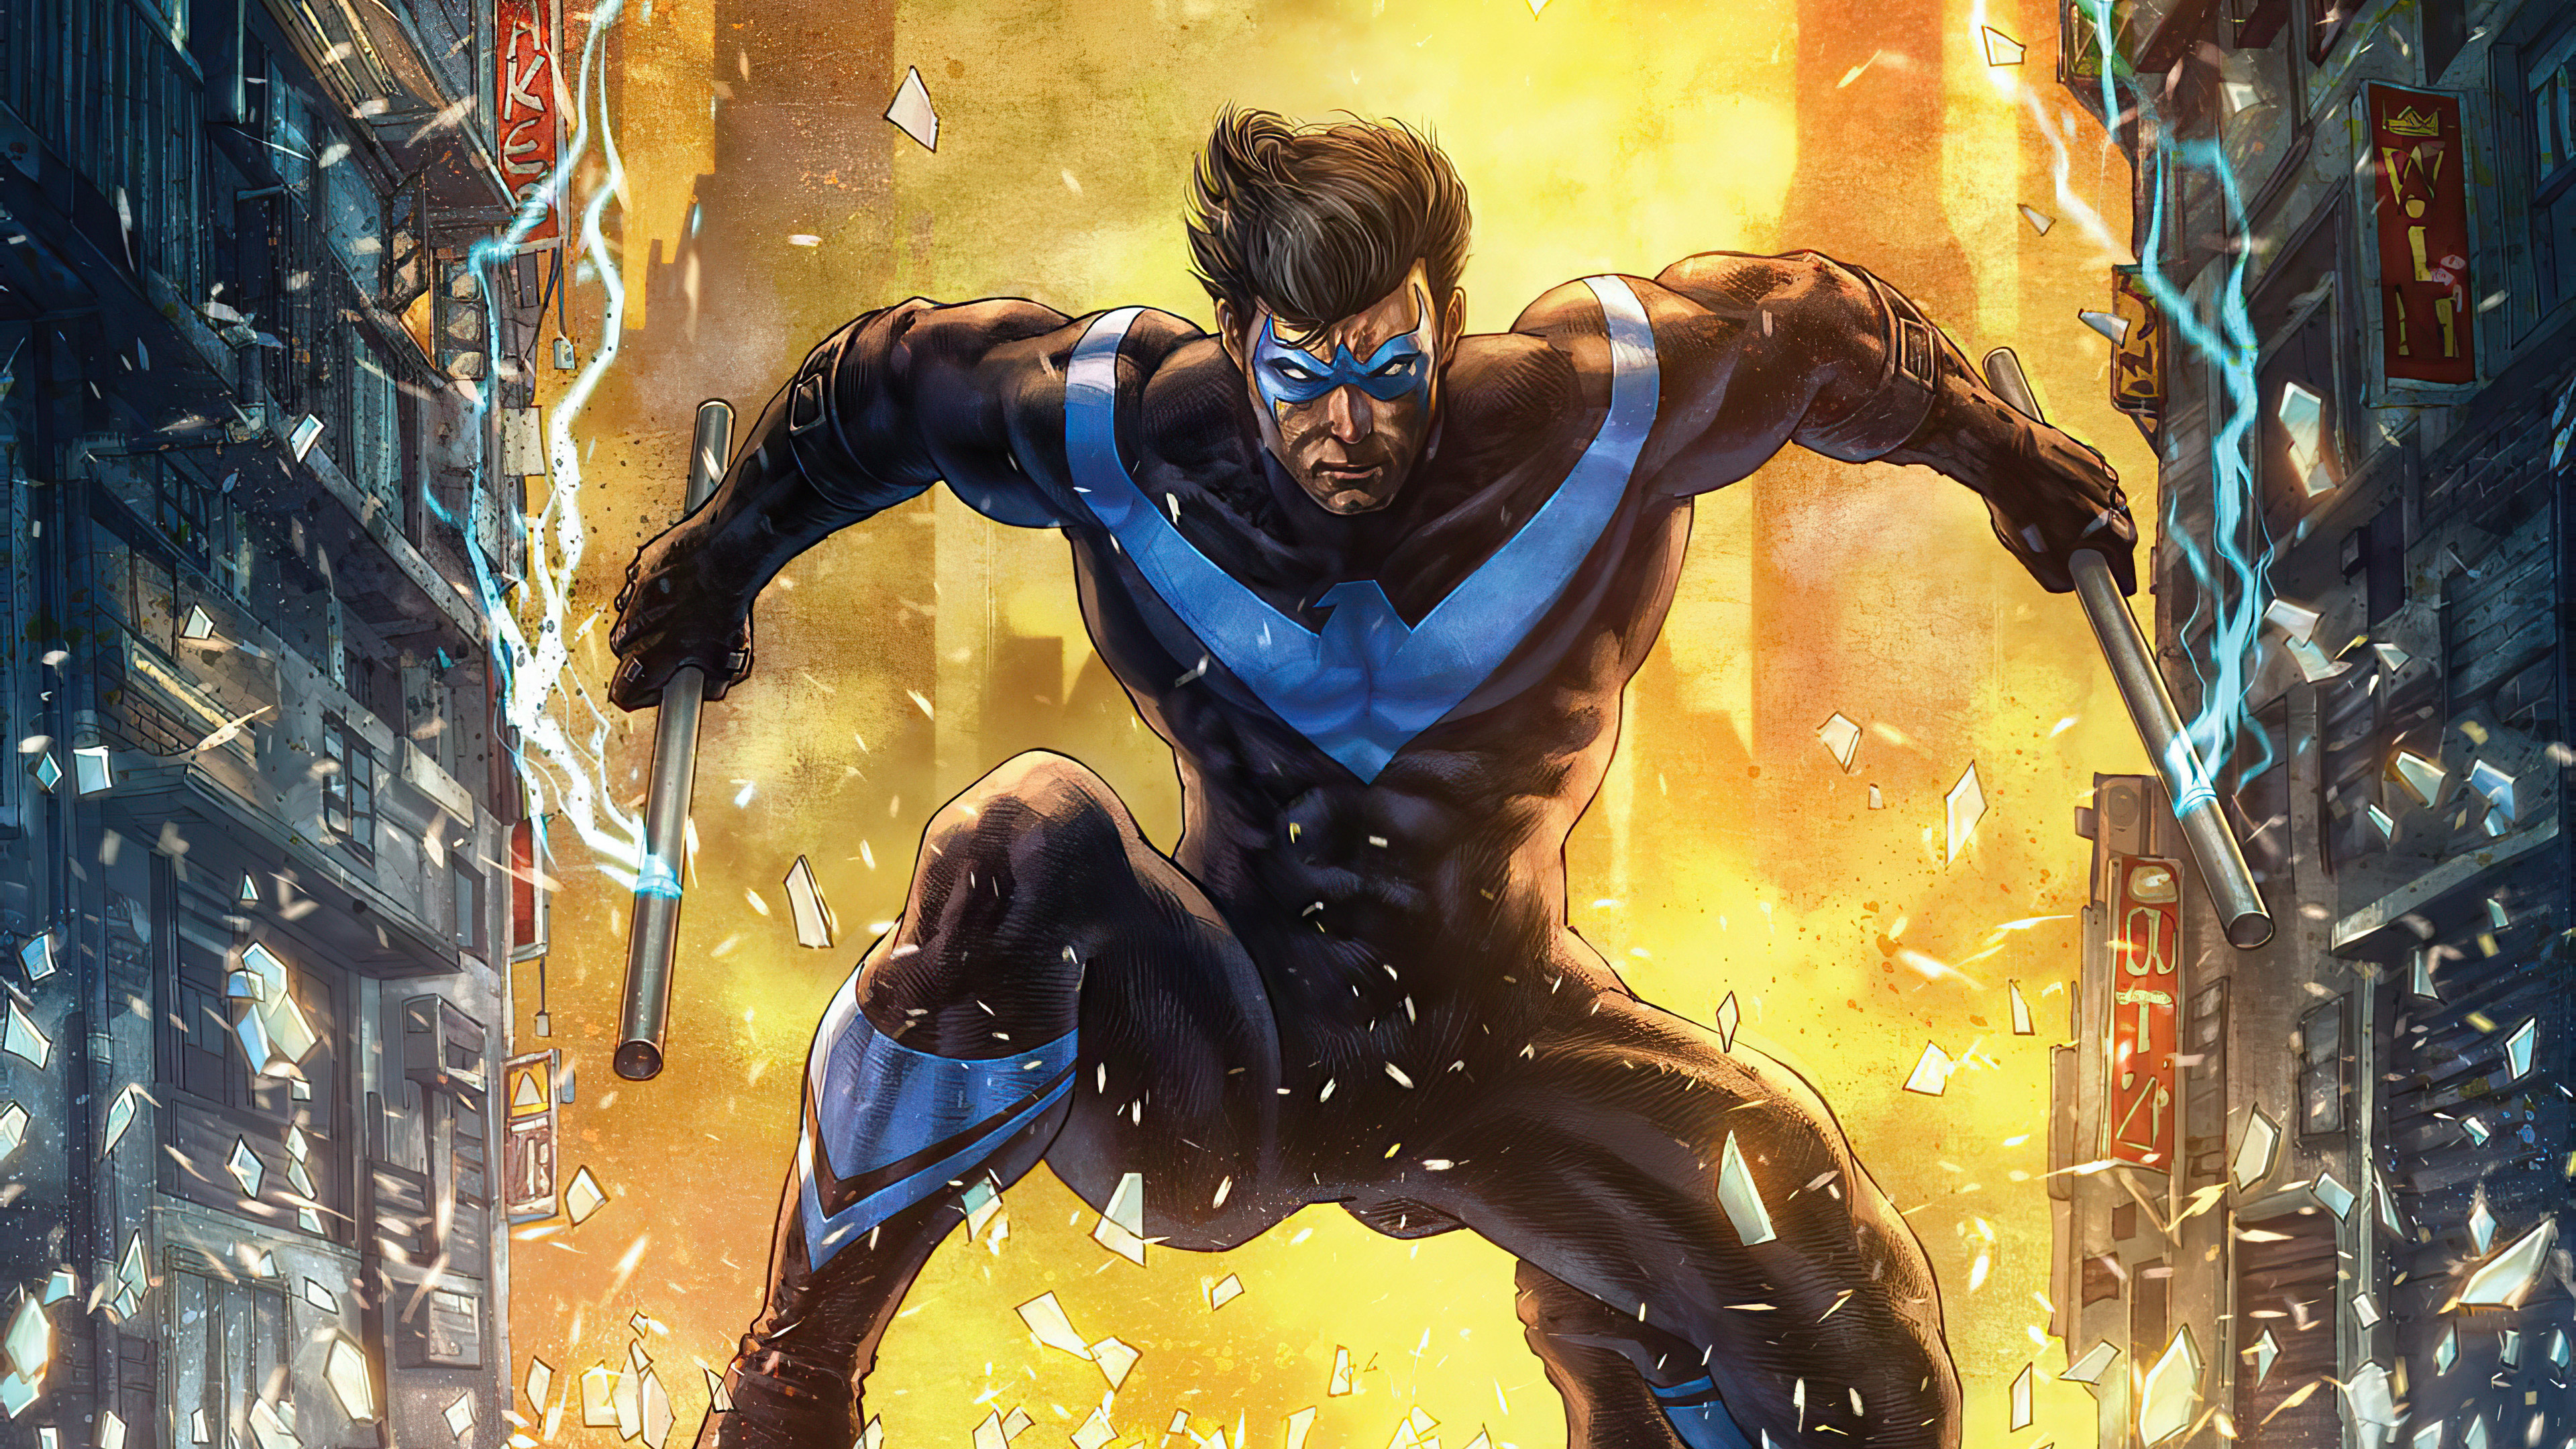 Nightwing Dc Comic Wallpaper Hd Superheroes 4k Wallpapers Images Photos And Background Wallpapers Den